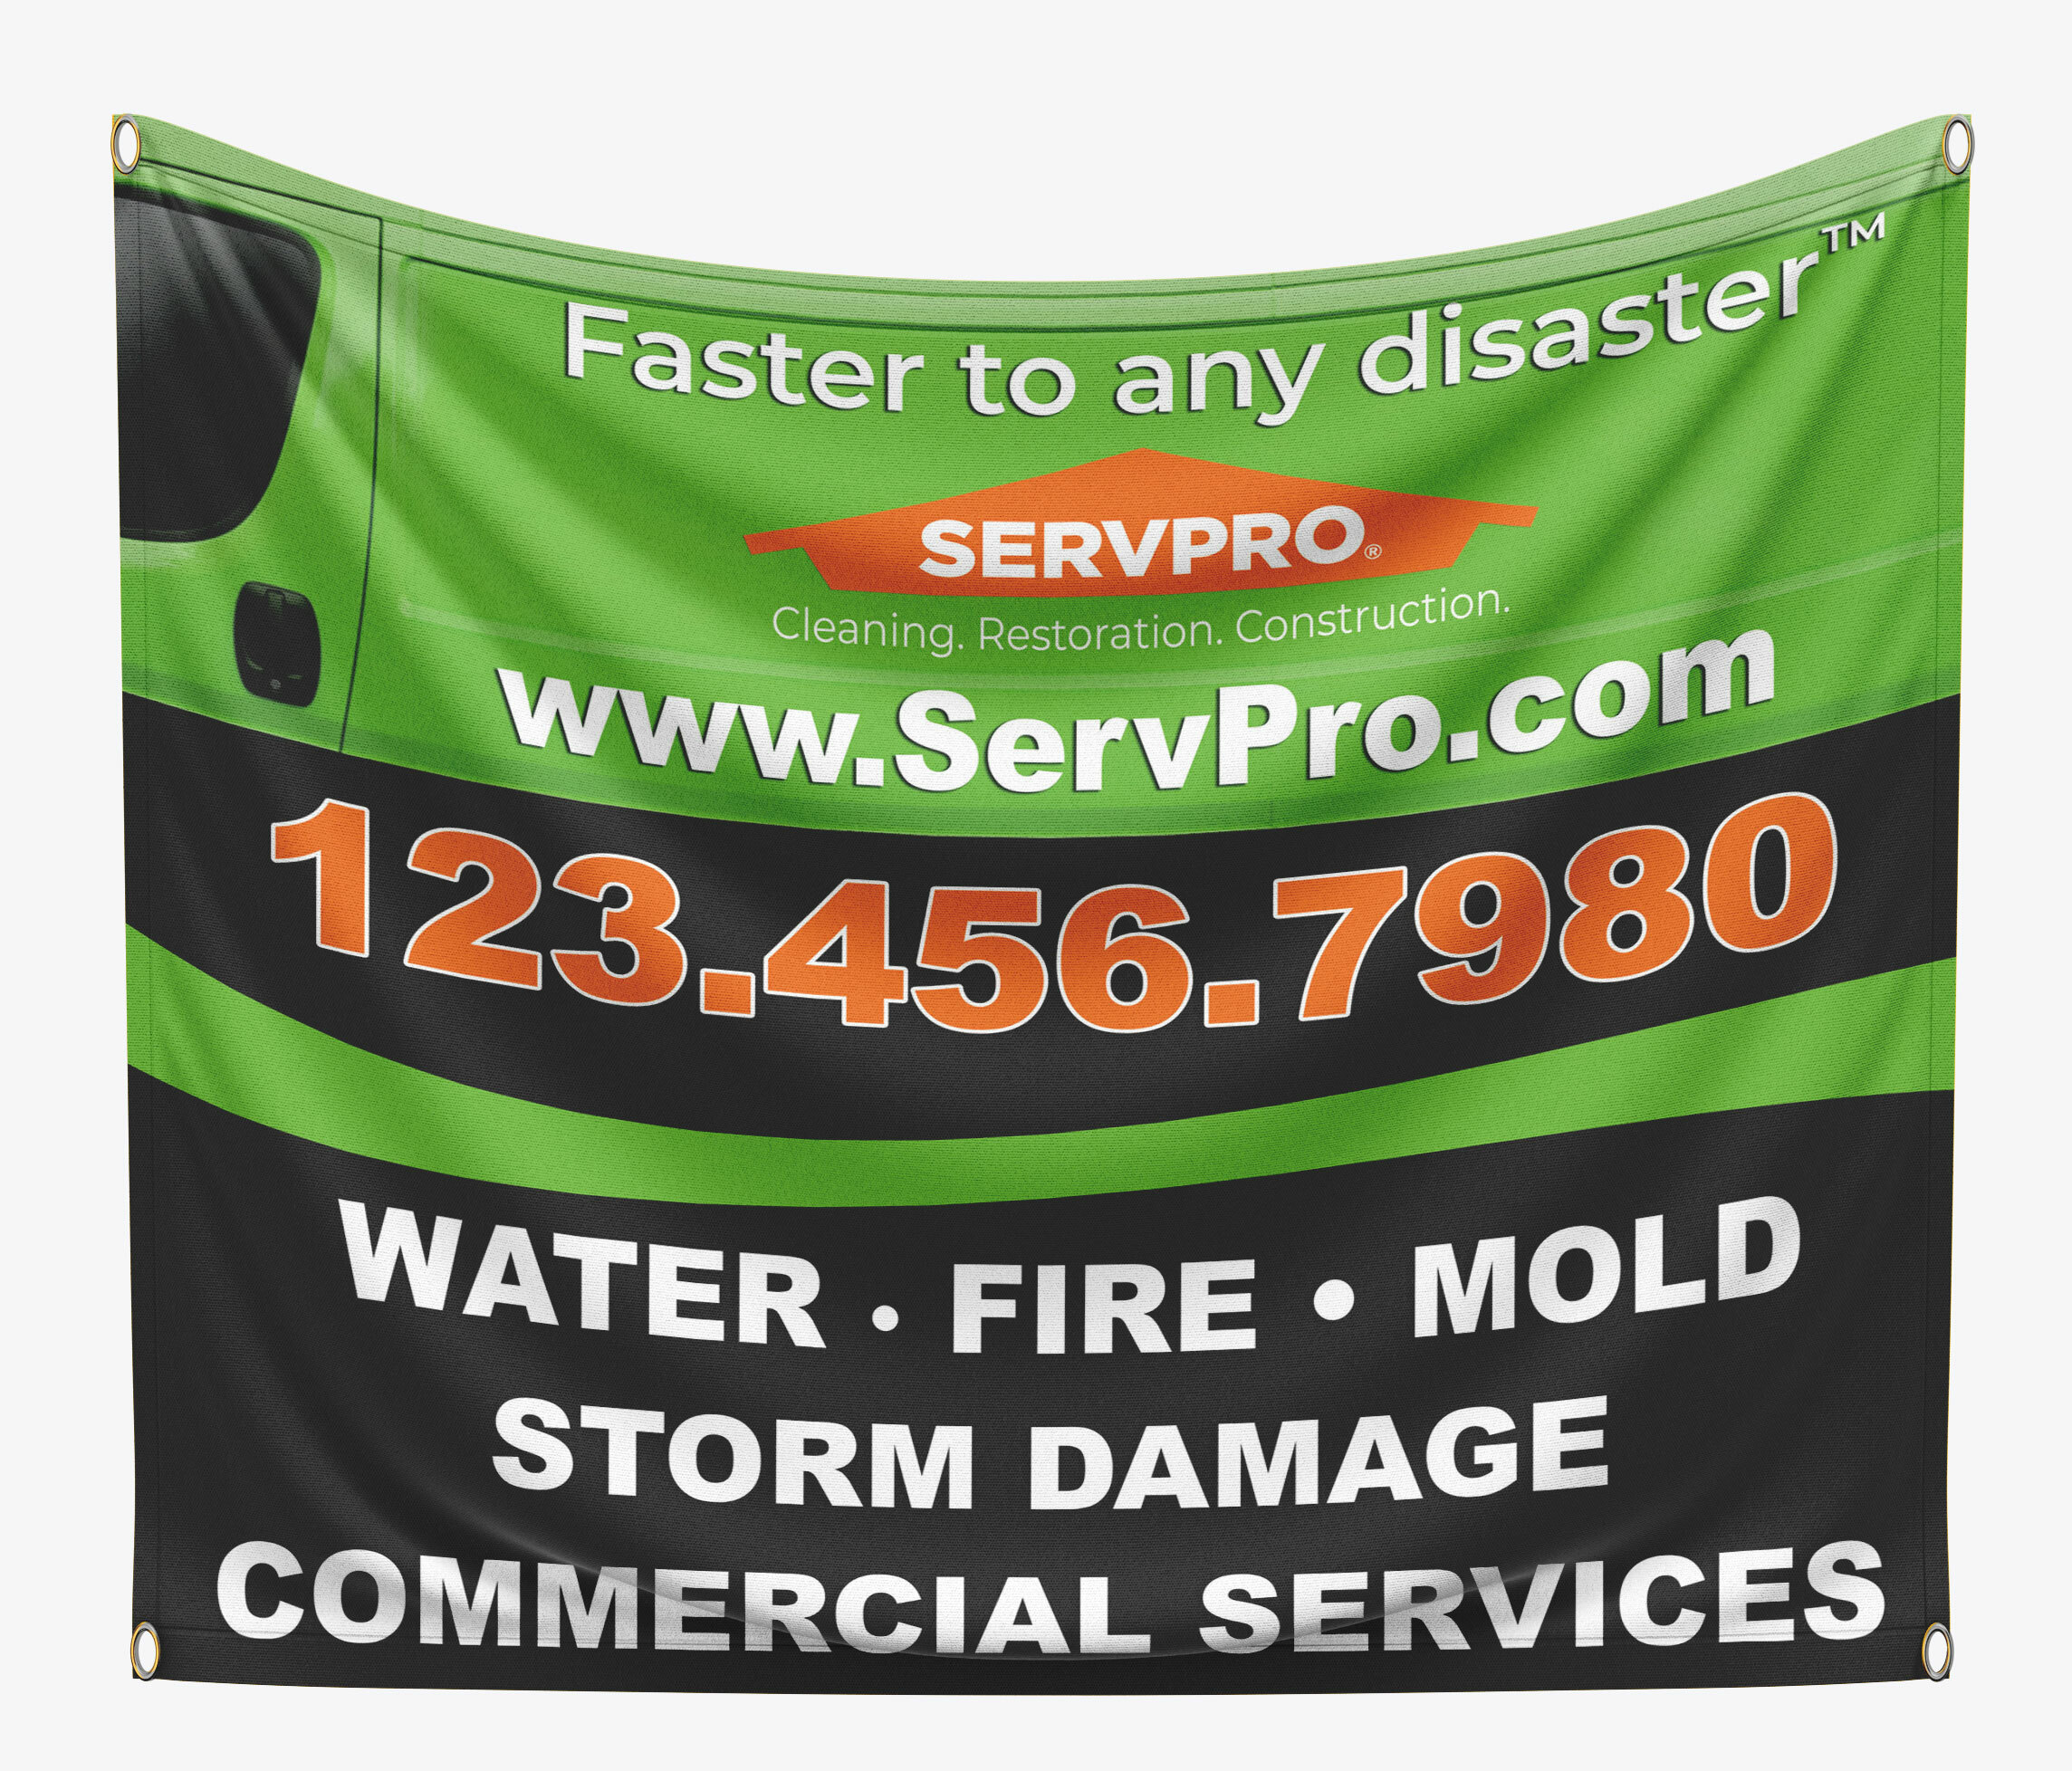 The Servpro banner enhances your brand's visibility in storm-hit regions, proving to be a wise investment for your restoration services.